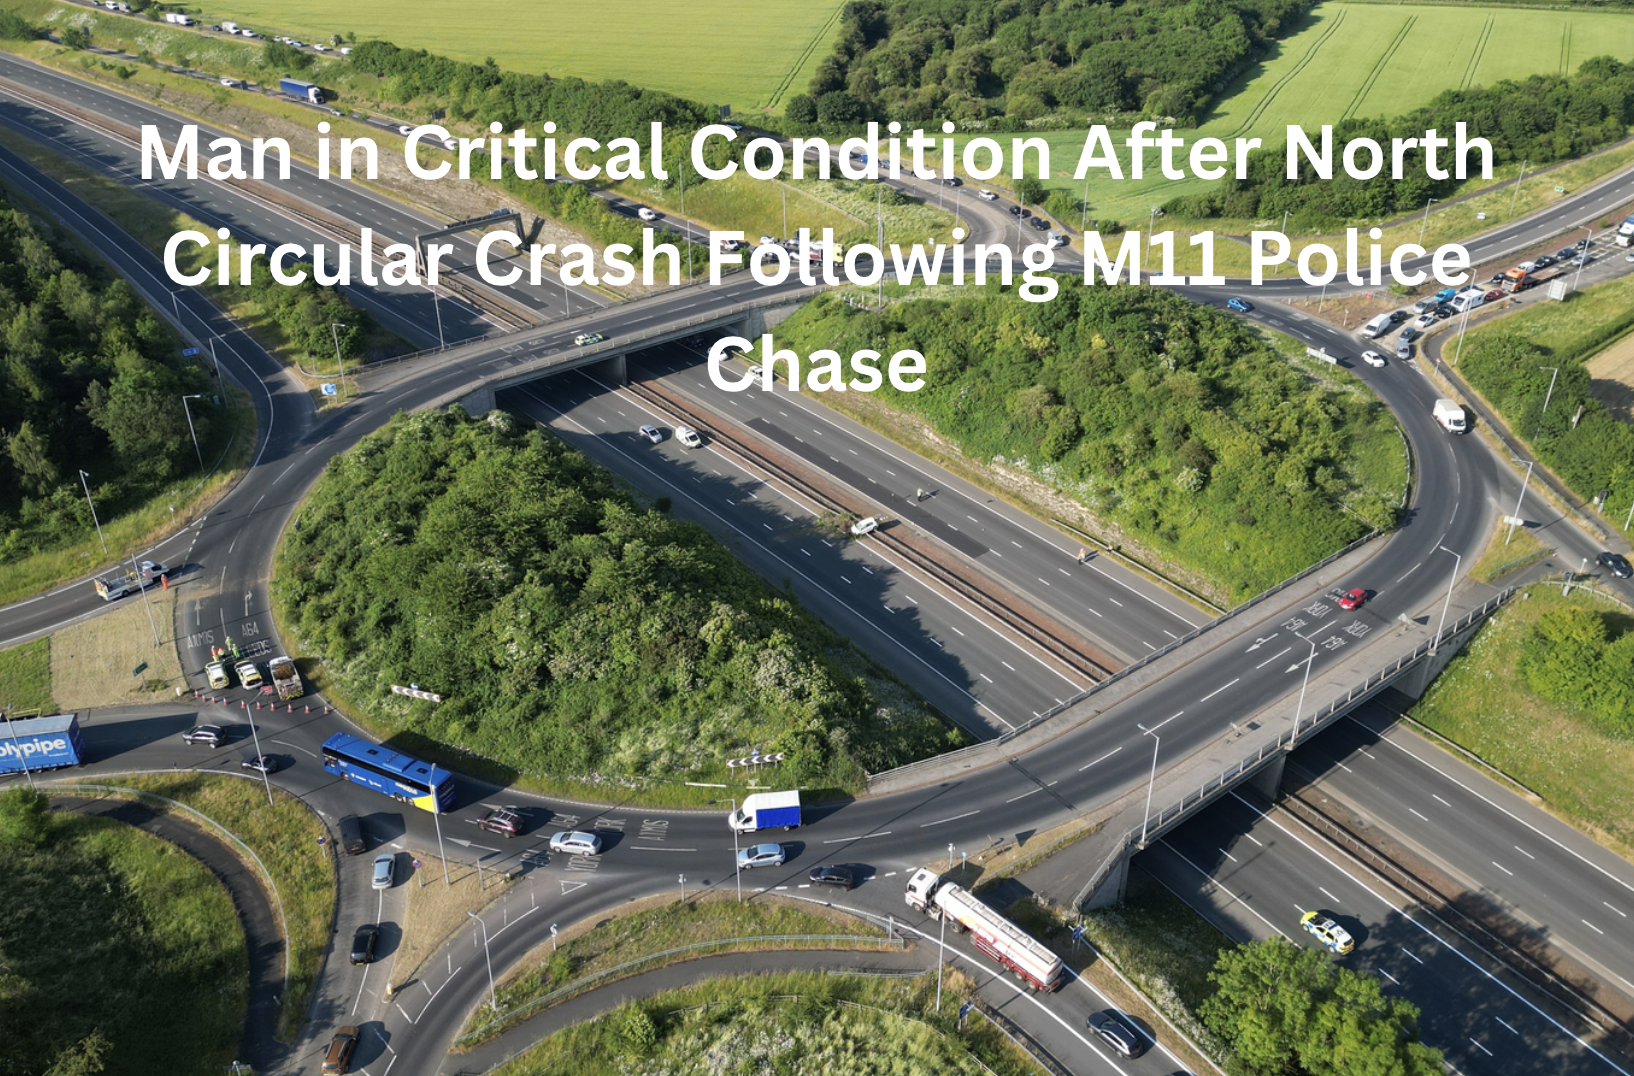 Man in Critical Condition After North Circular Crash Following M11 Police Chase